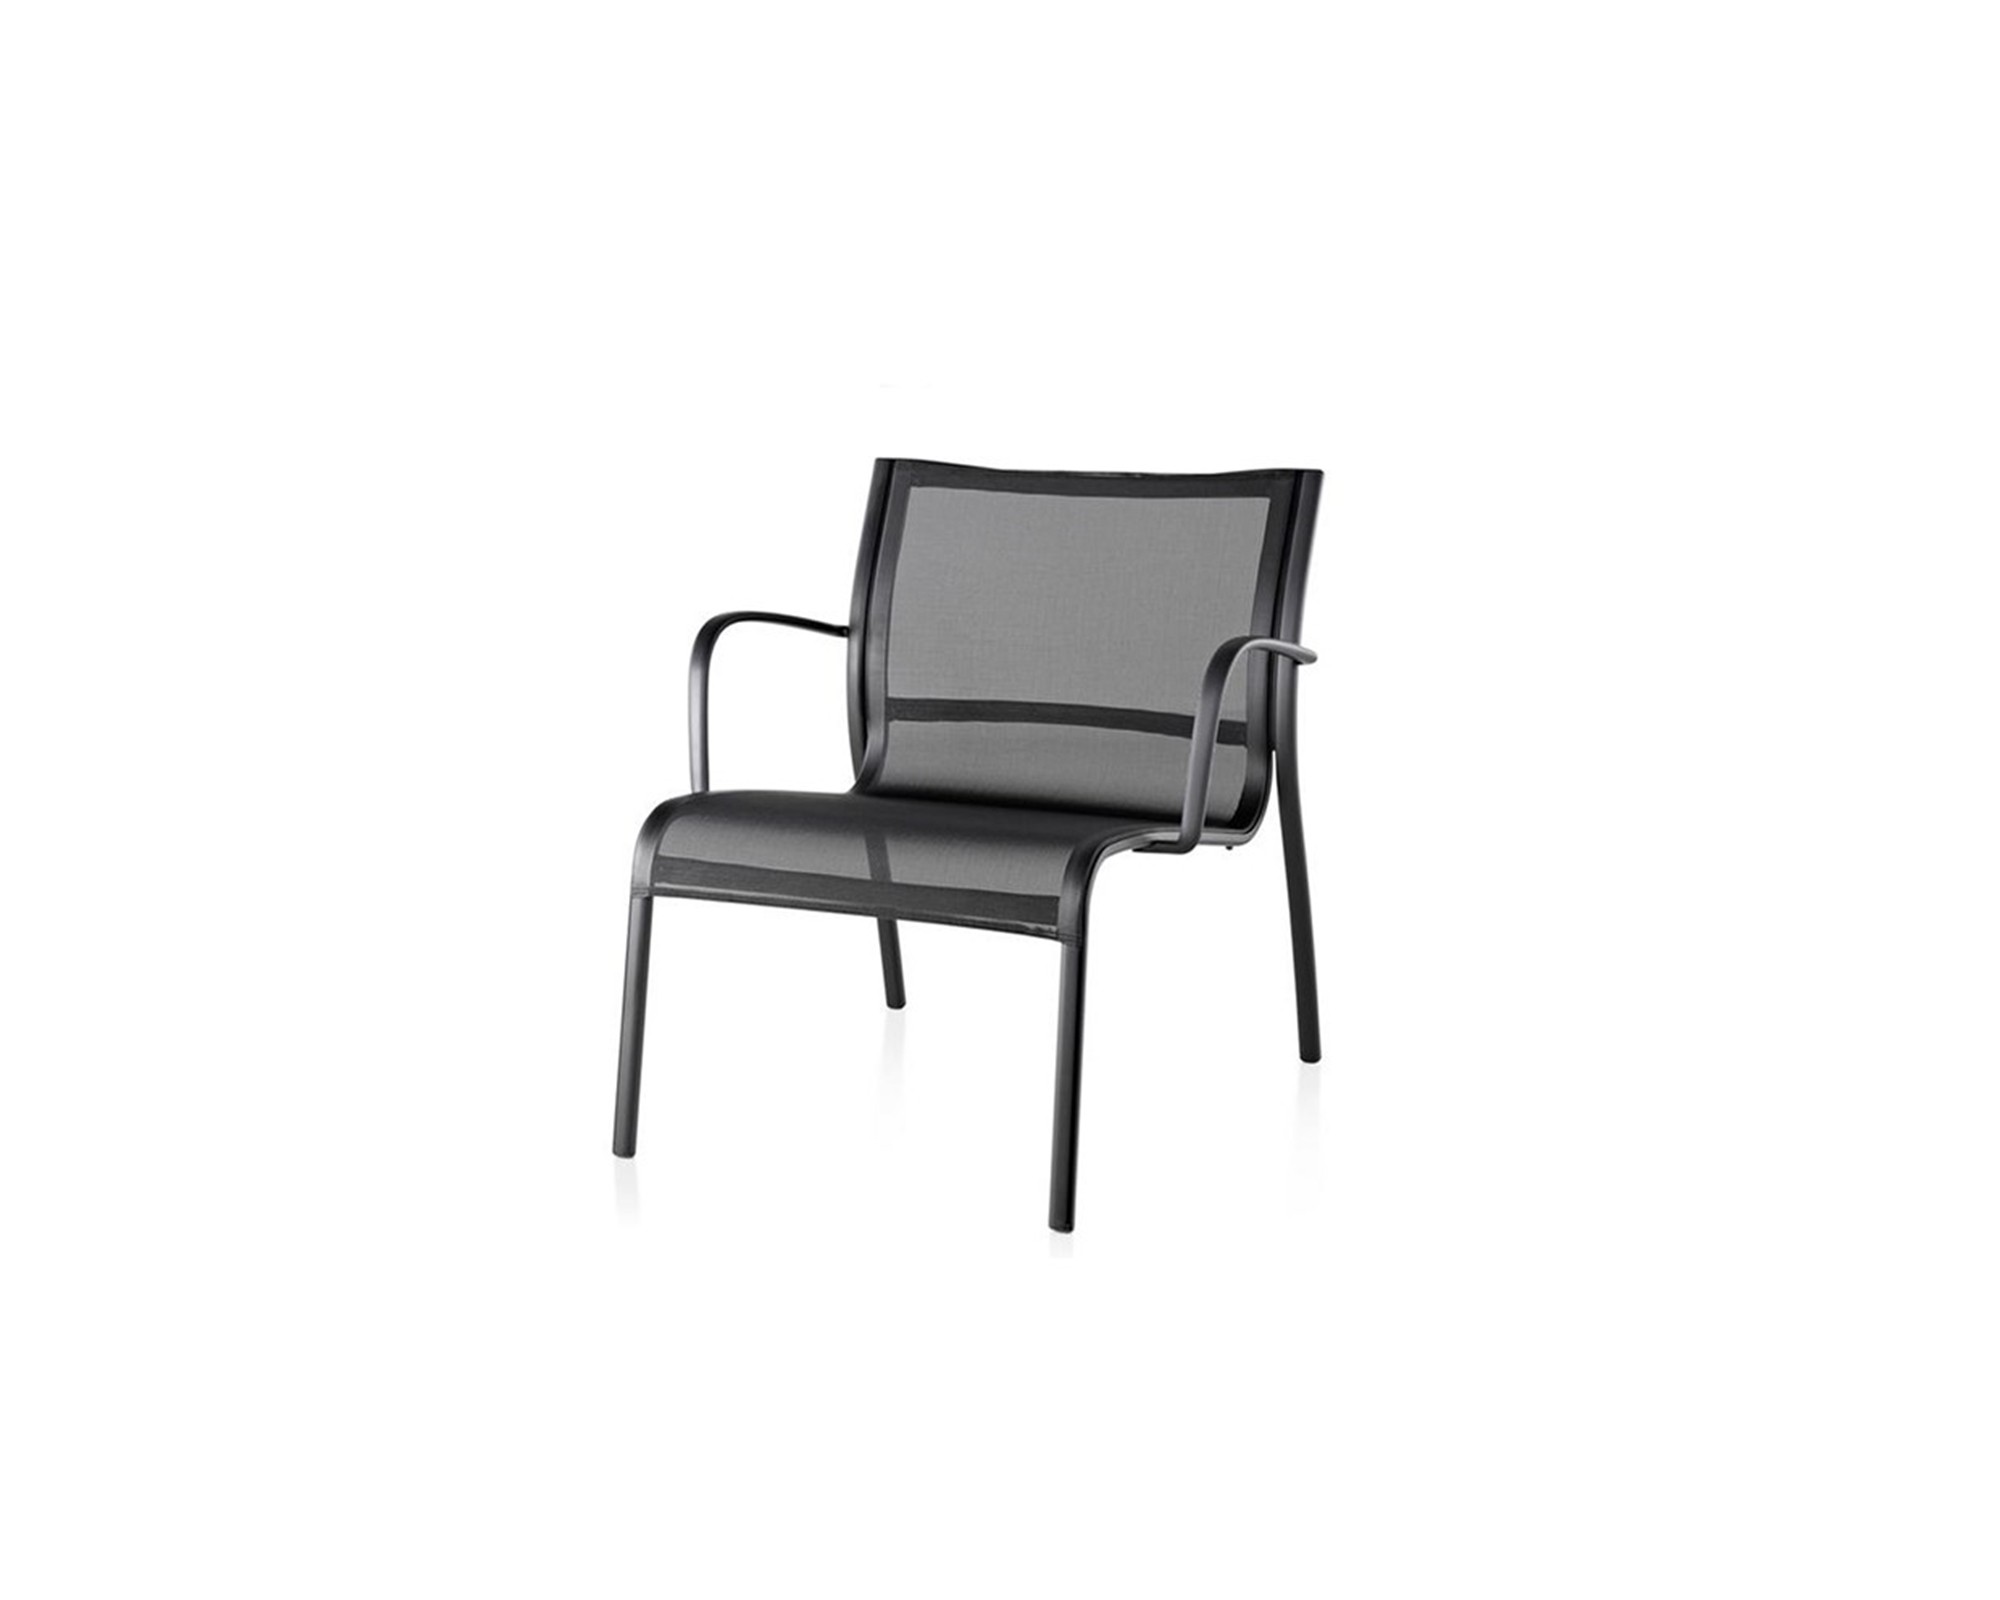 Paso Doble Stacking Low Chair